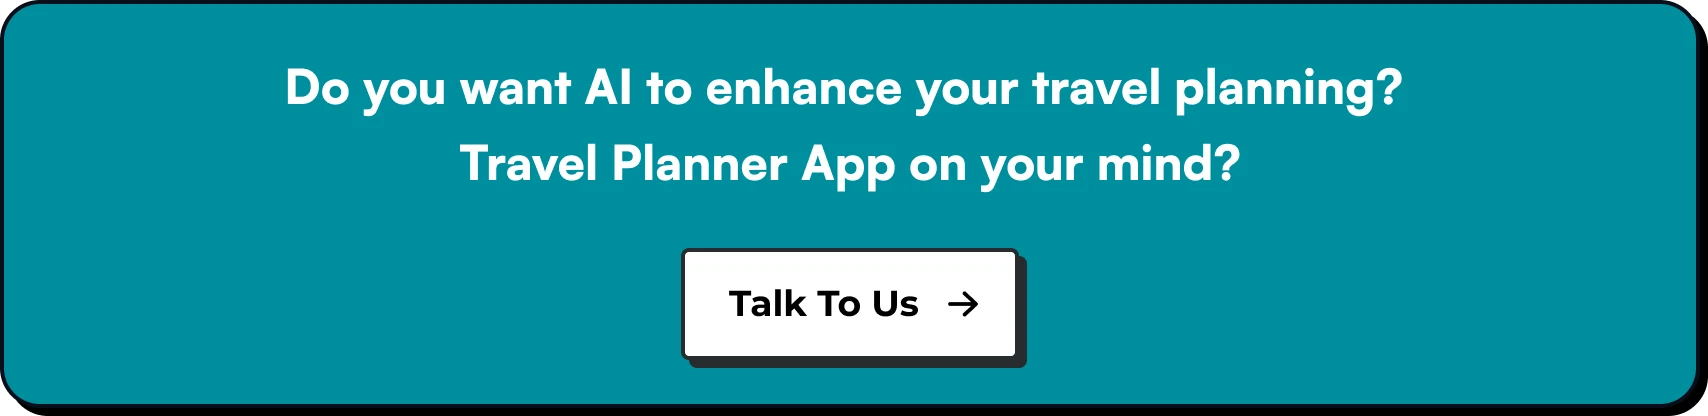 Do you want AI to enhance your travel planning? Travel Planner App on your mind?